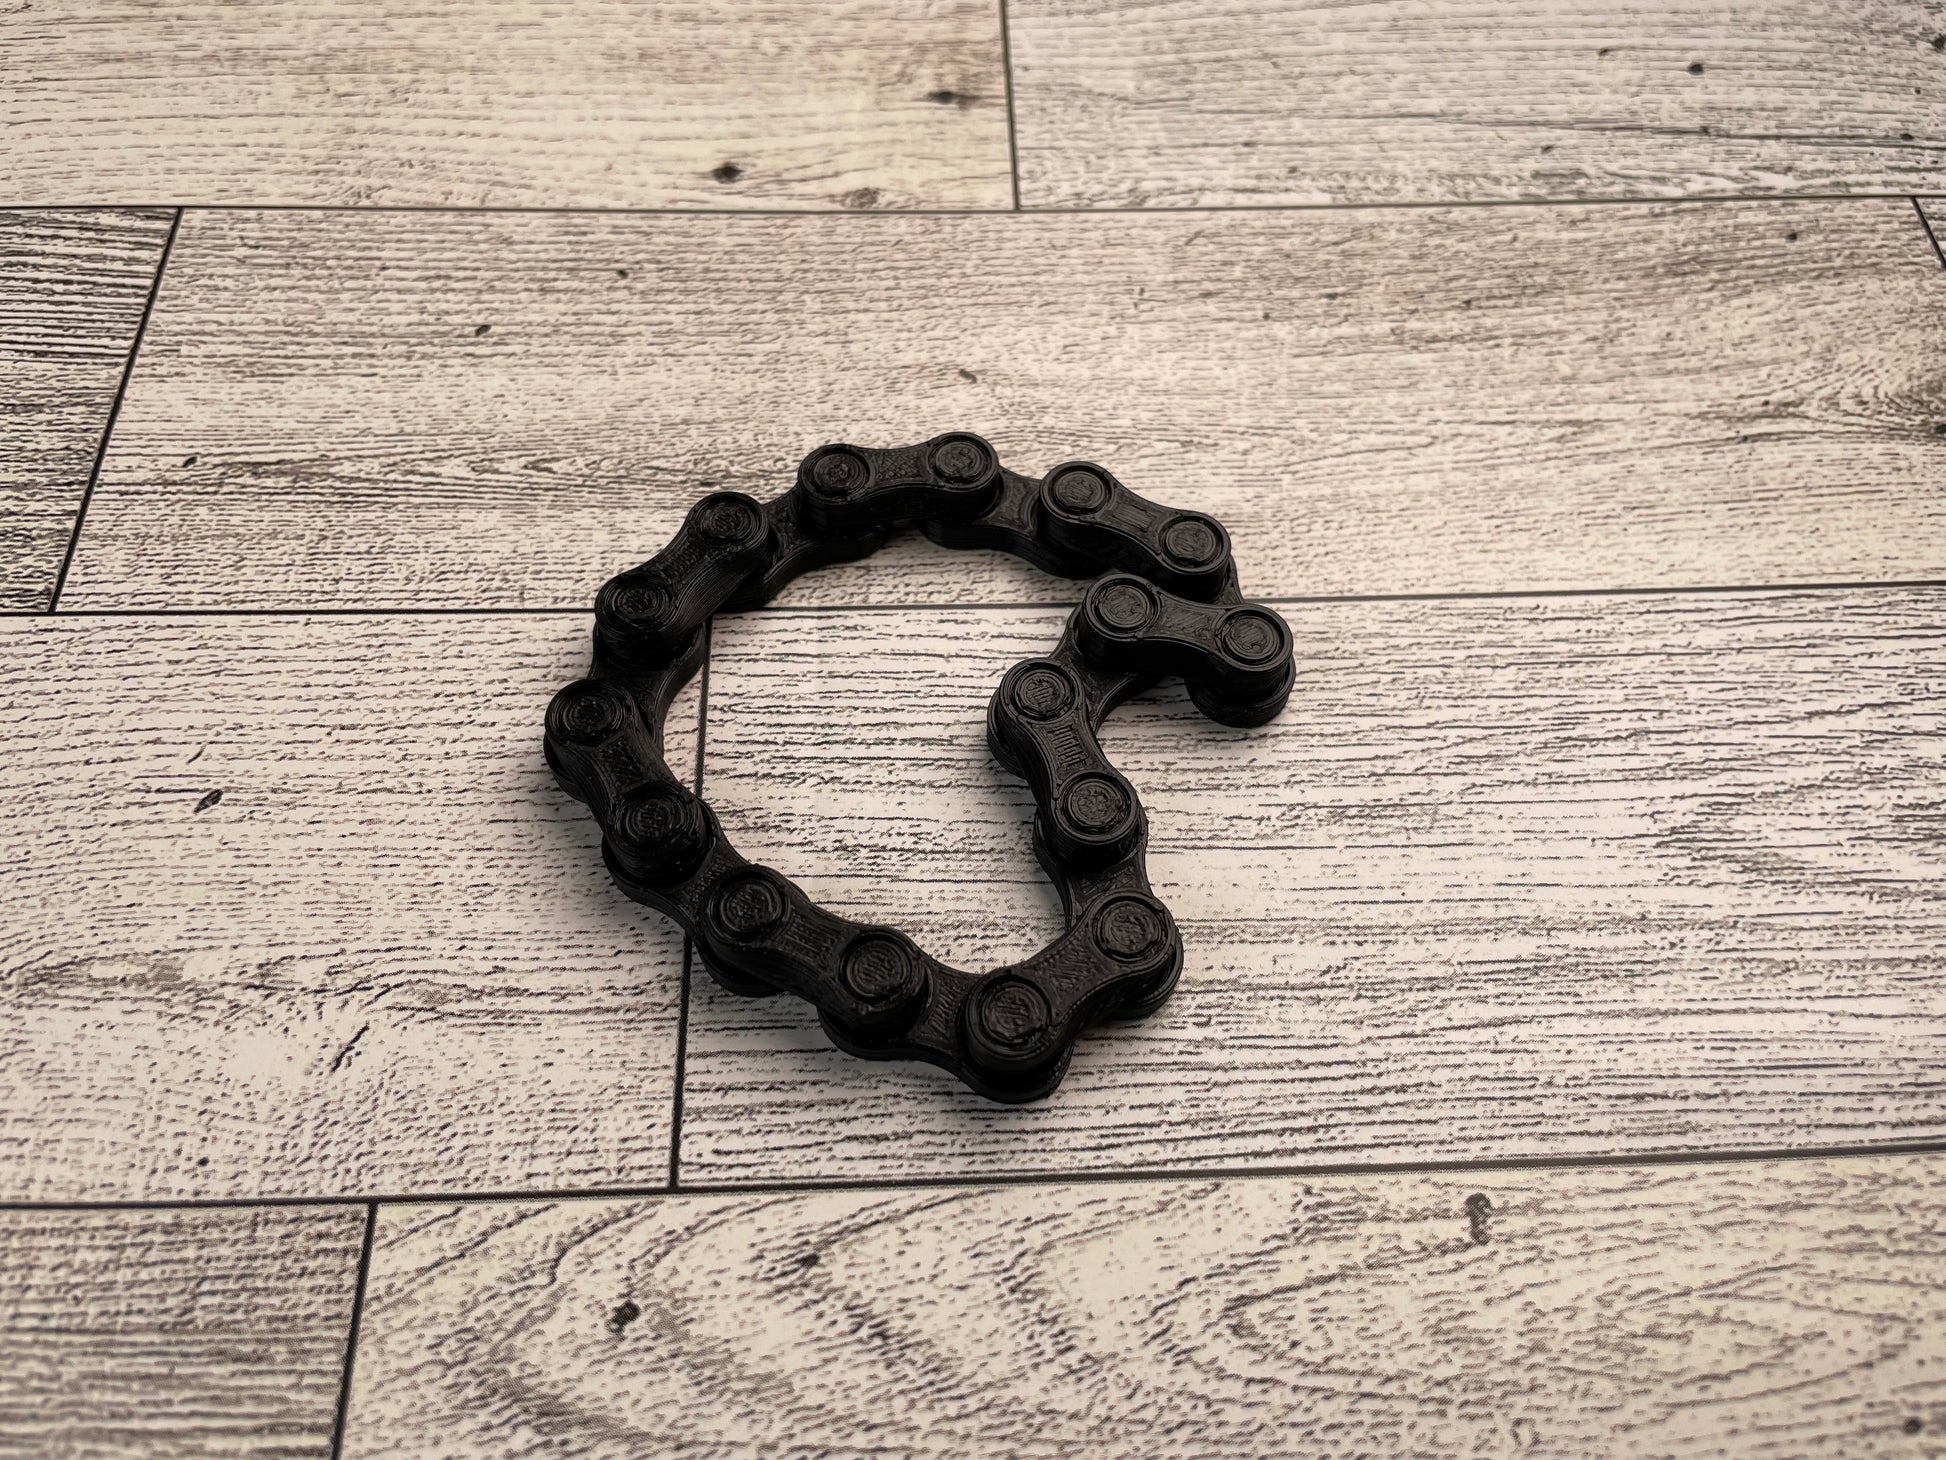 A black chain link on a wood backdrop. The chain is arranged in a squished heart shape and there are eight links.